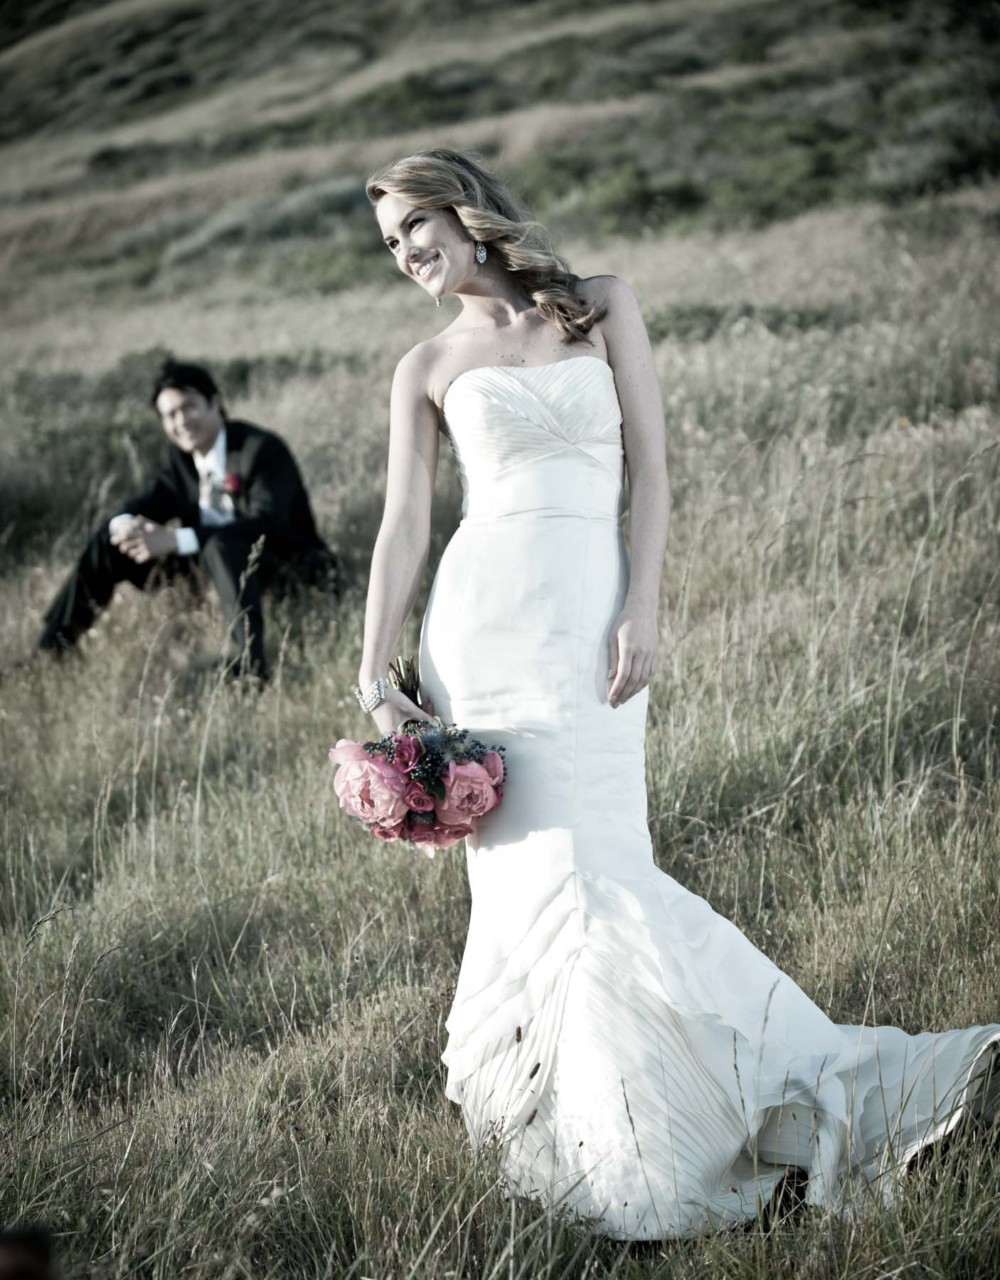 Looking for a top wedding photographer in Wasilla?